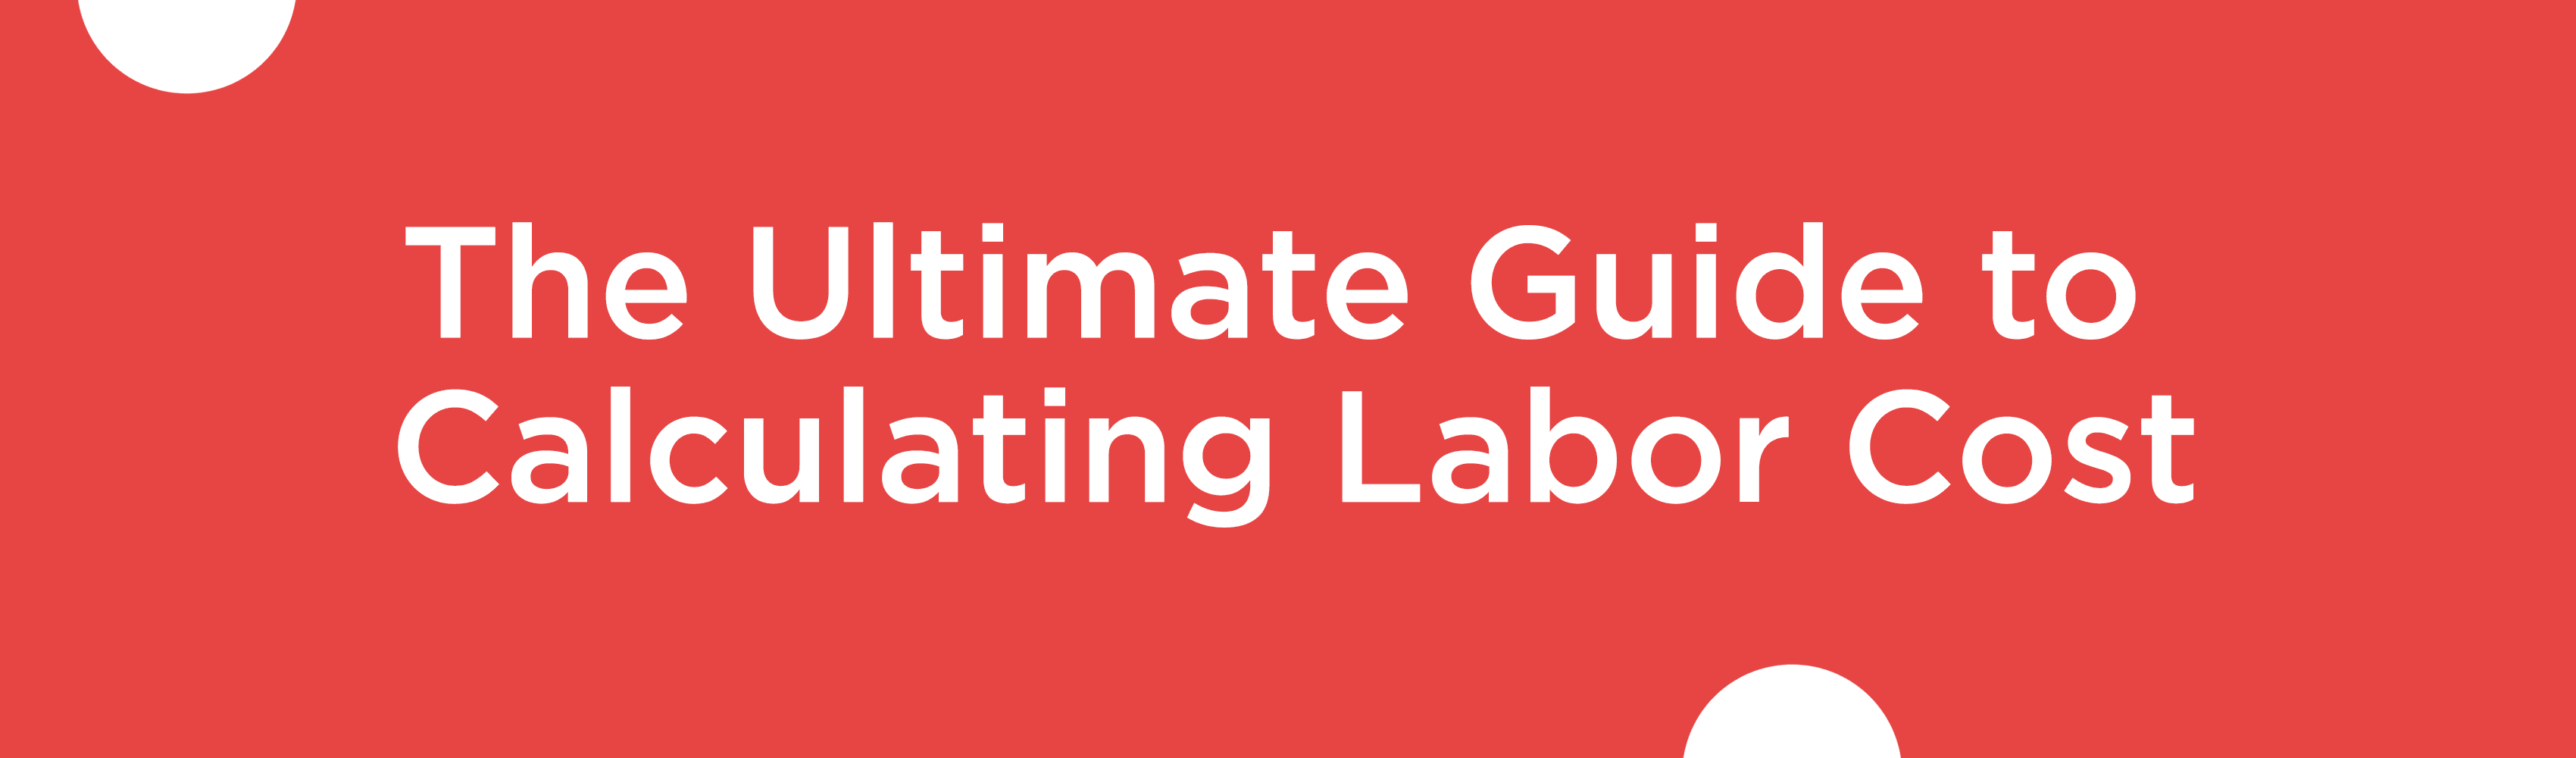 The Ultimate Guide to Calculating Labor Cost